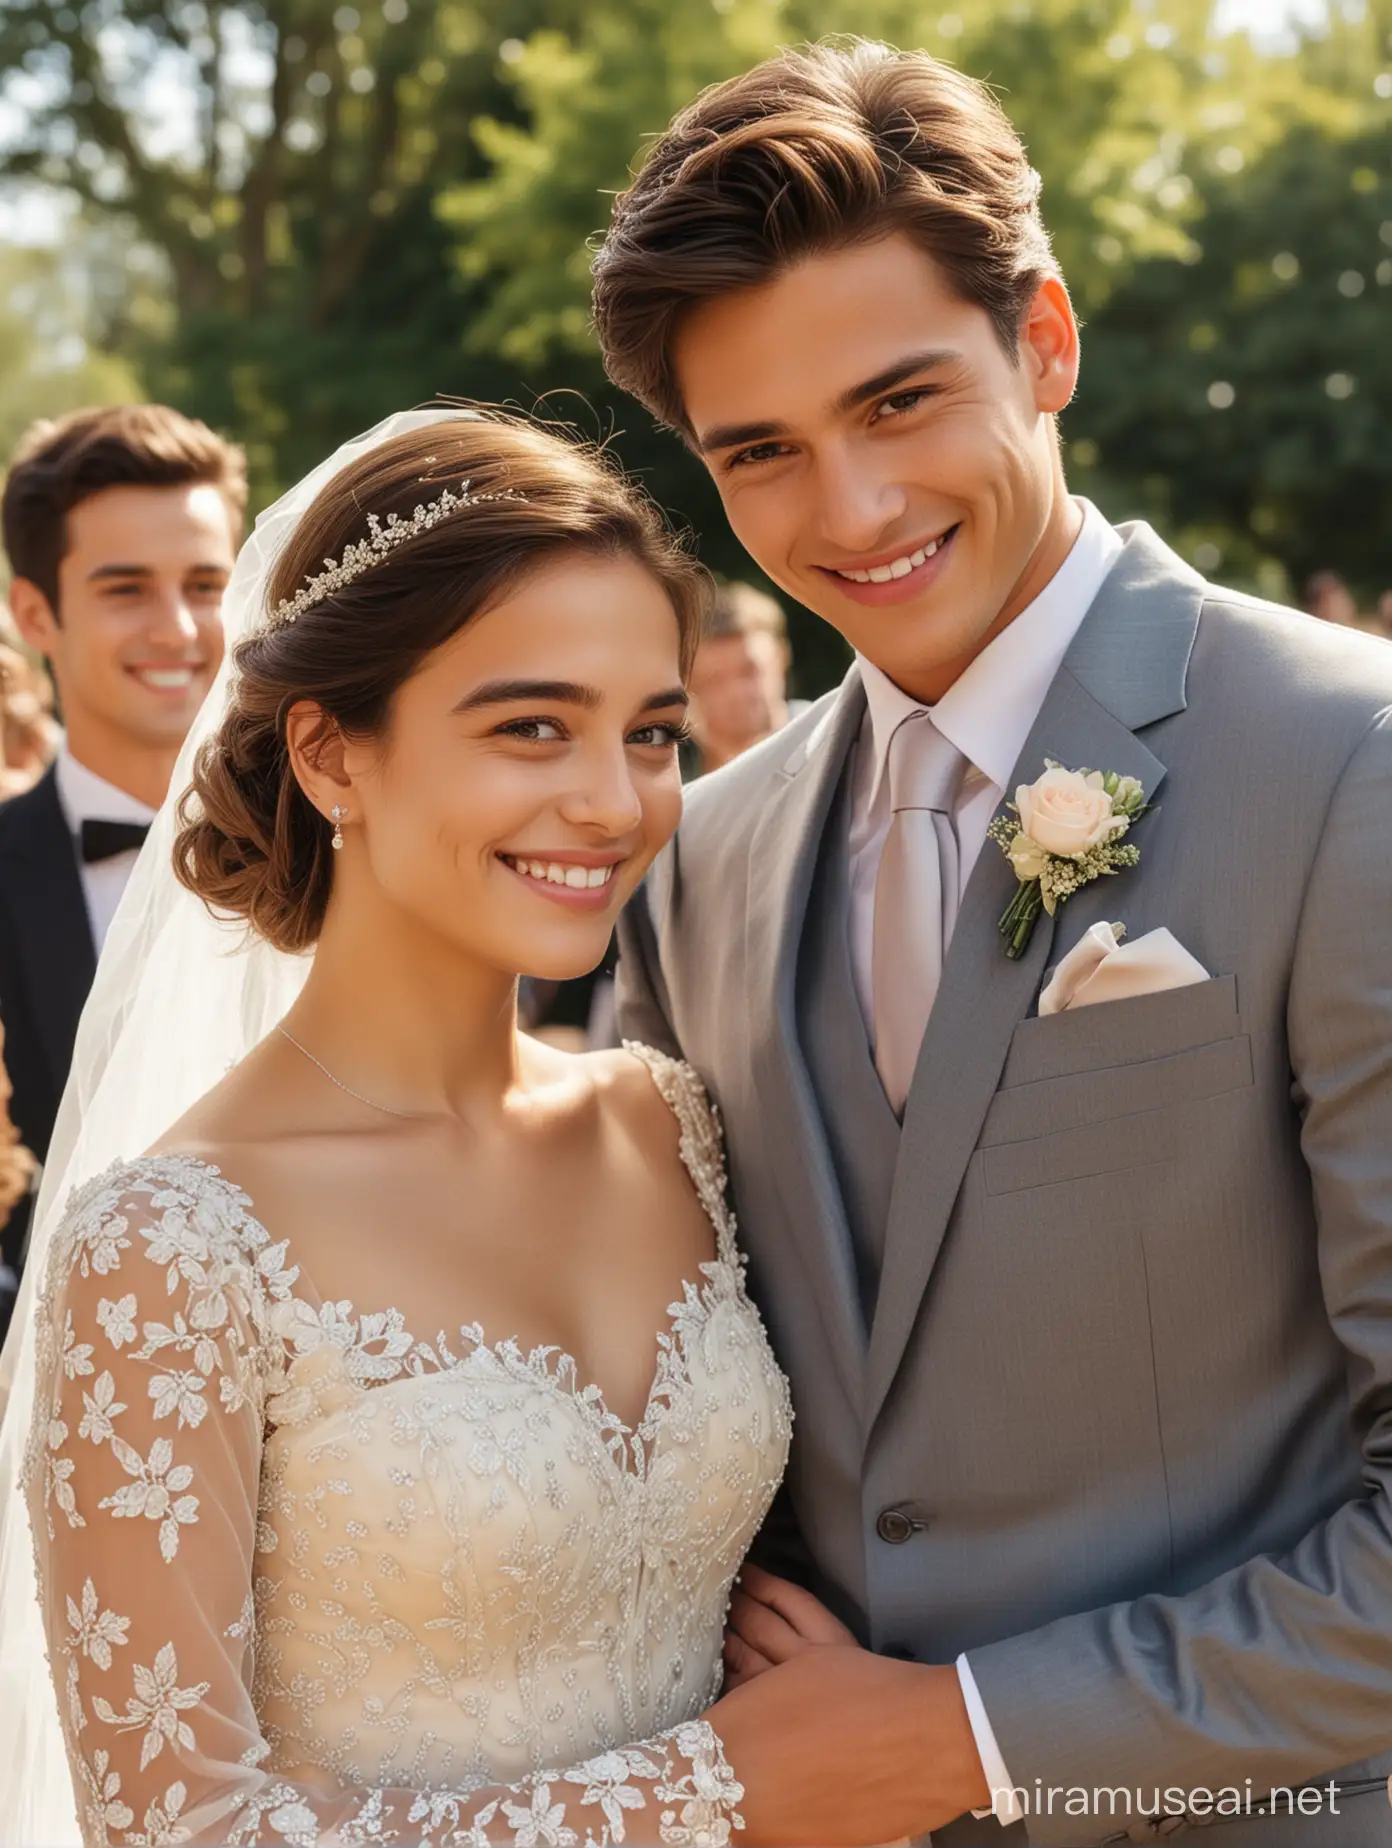 At the sunny wedding, a handsome men in 18 yo 
oval face,  handsome suits admire beautiful ladies. The lady dressed in a gorgeous gown gently rested her hand on the man's shoulder and stared at the camera with a smile.